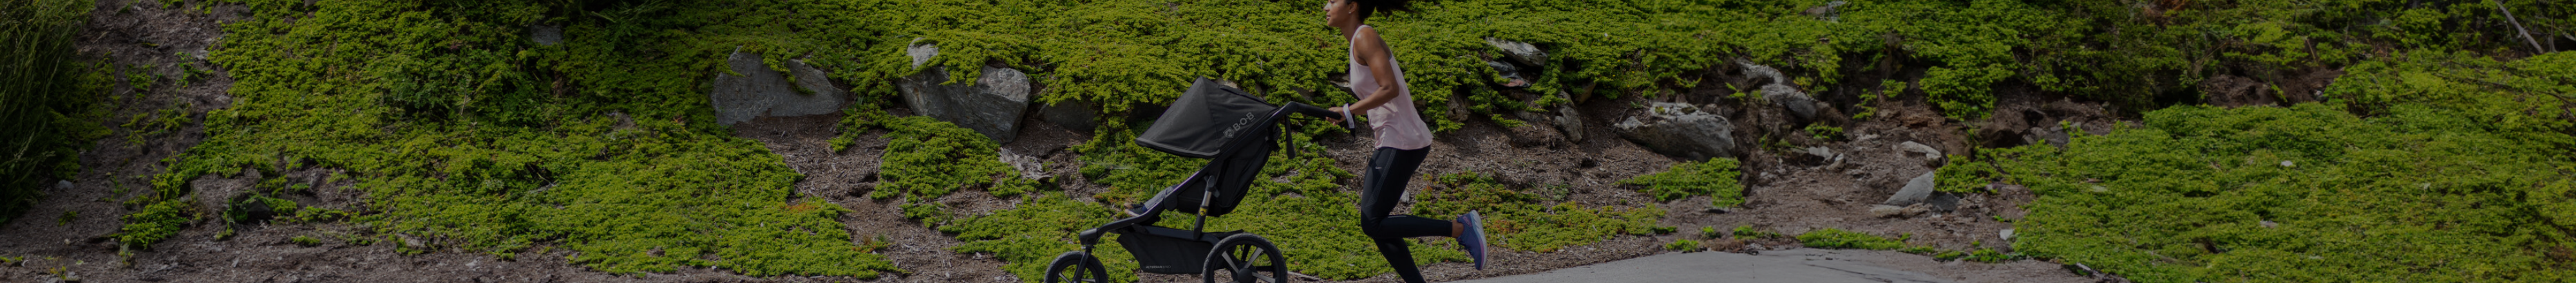 Mother running with baby in a BOB Alterrain Pro jogging stroller